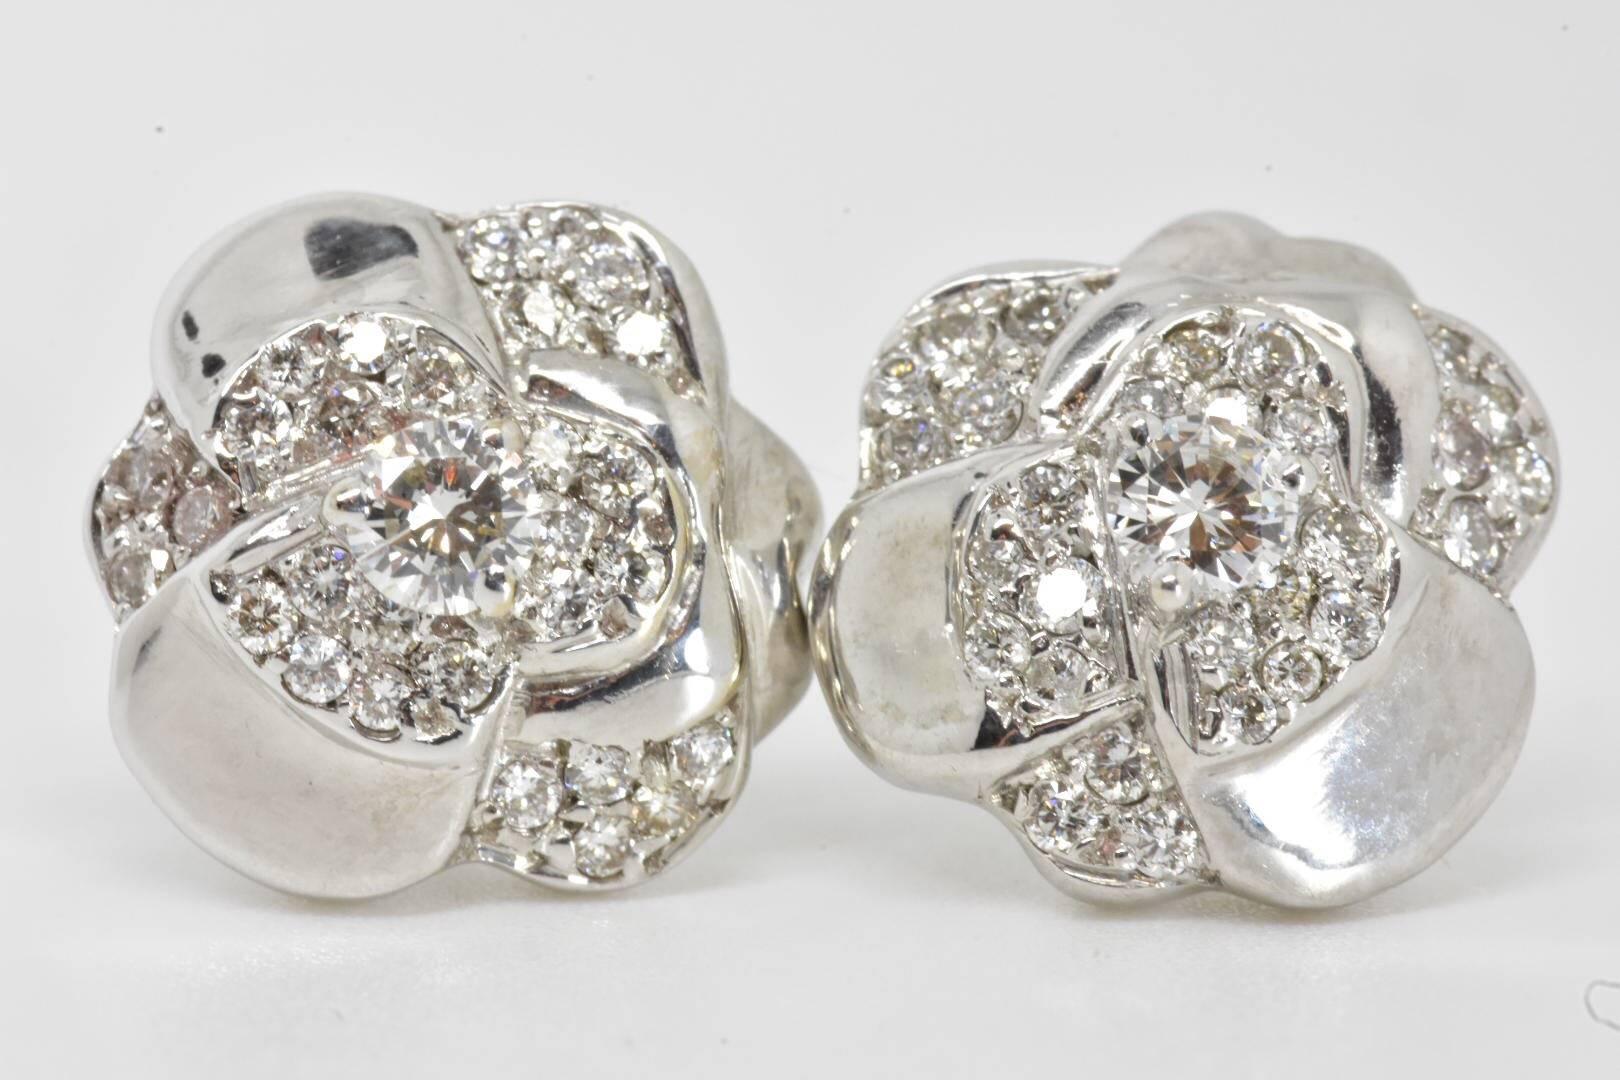 A pair of Chanel Camellia diamond stud earrings set in 18k white gold. Each earring features a central brilliant cut diamond of approx 0.10 carat with an additional 29 small brilliant cut diamond set to a camellia flower shape setting.
Measurements: